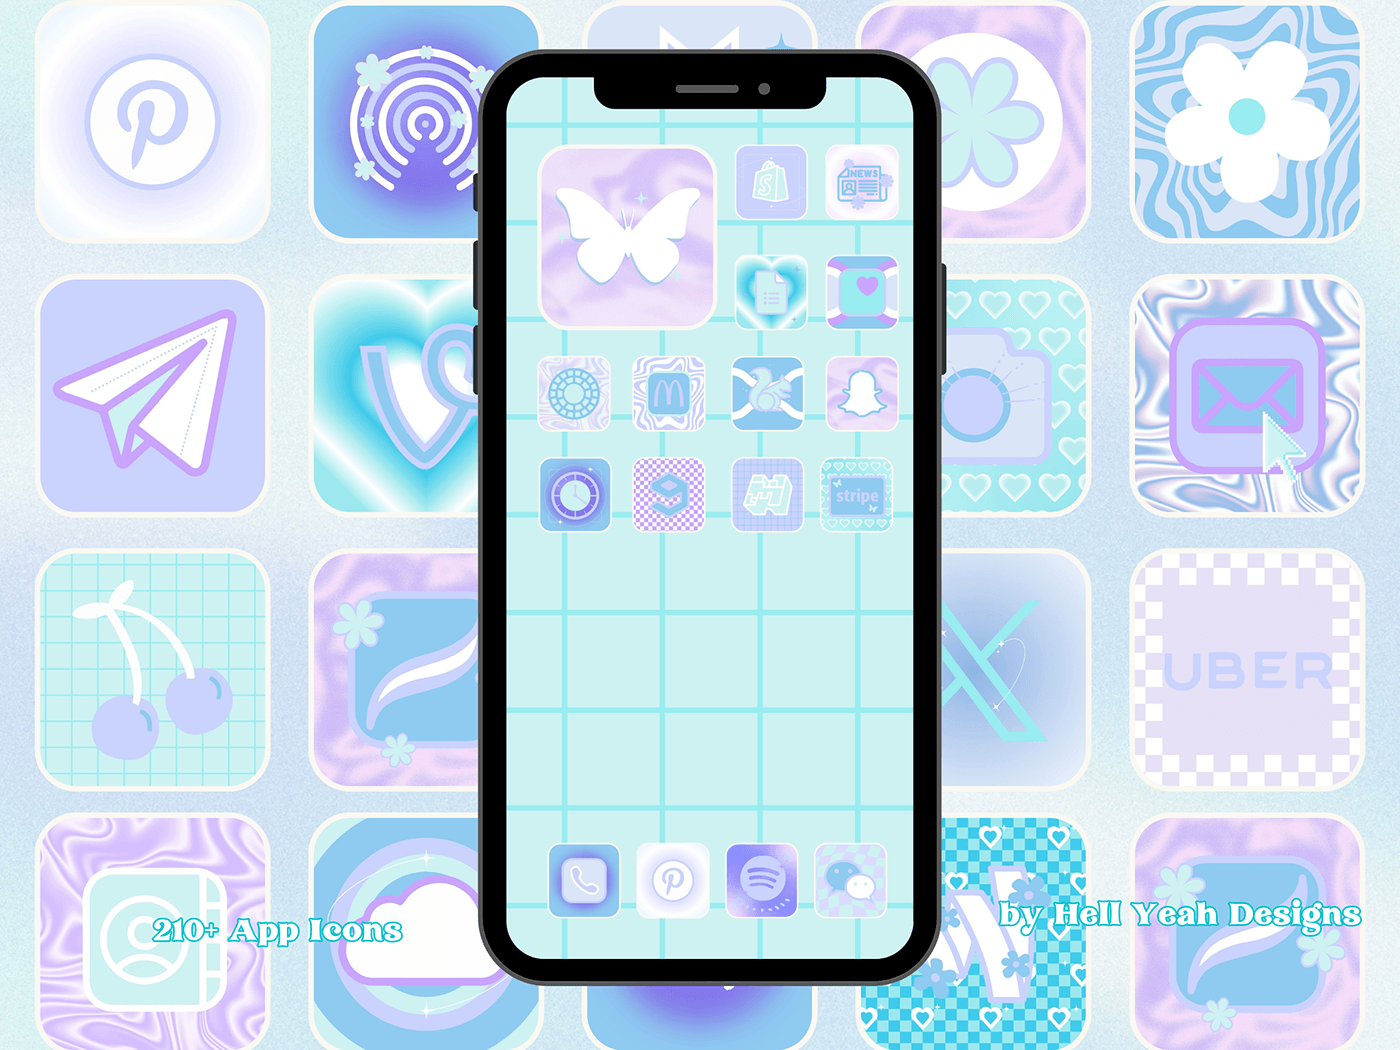 app icons icon design  ios android Mobile app cute Y2K aesthetic graphic design  ILLUSTRATION 